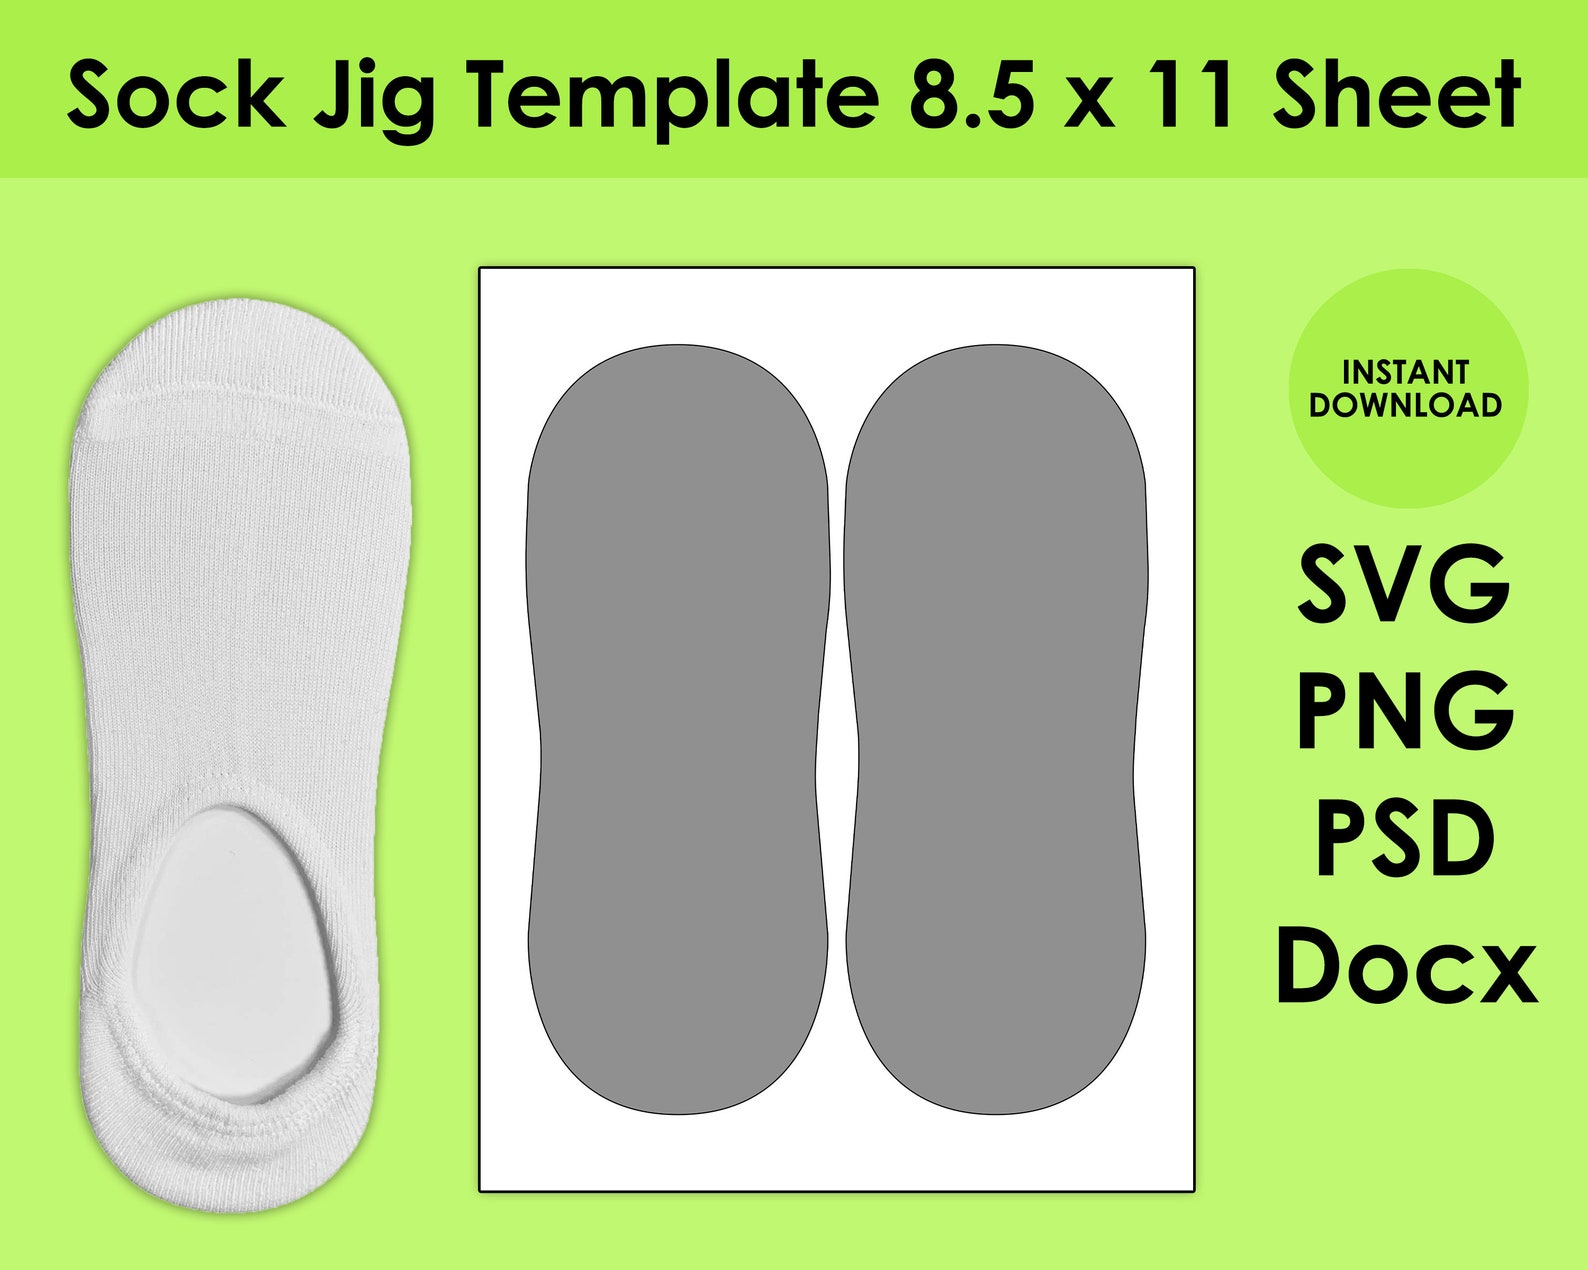 Sock Jig Template 8.5x11 Sheet SVG PNG PSD and DOCx | Etsy